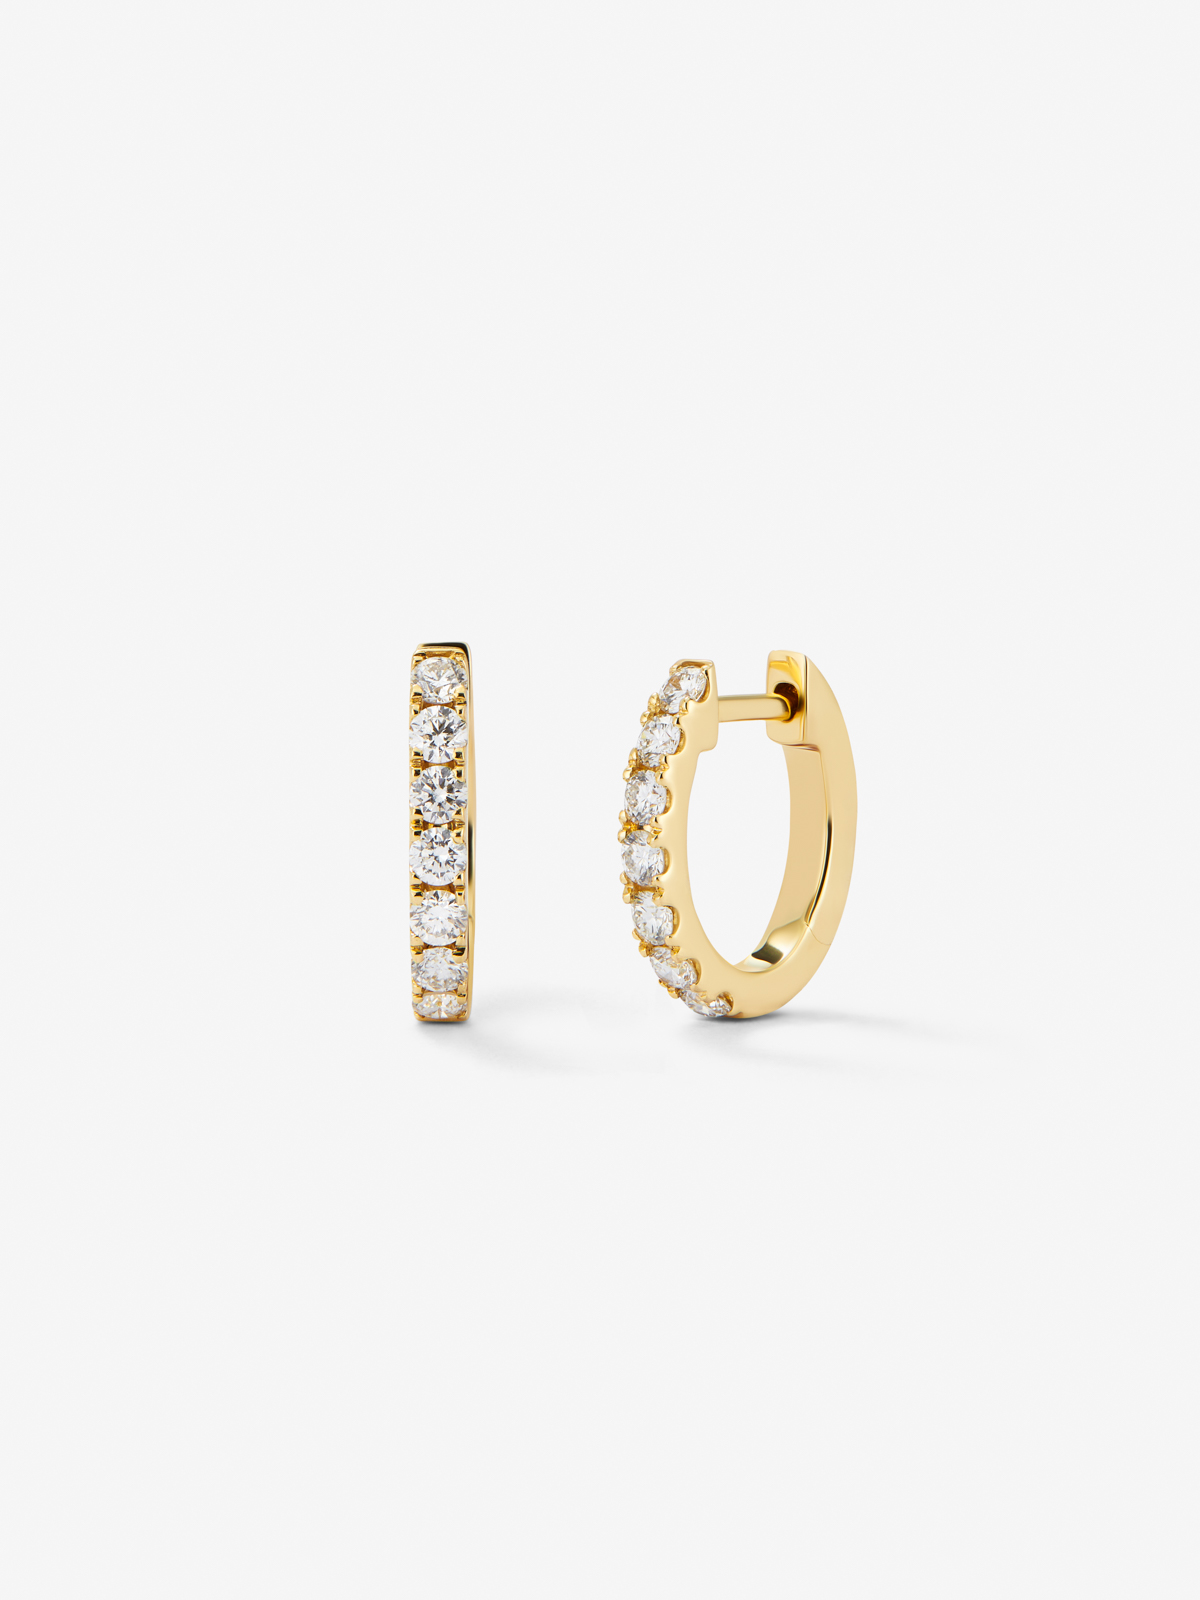 18K yellow gold ring earrings with white 0.39 cts bright diamonds